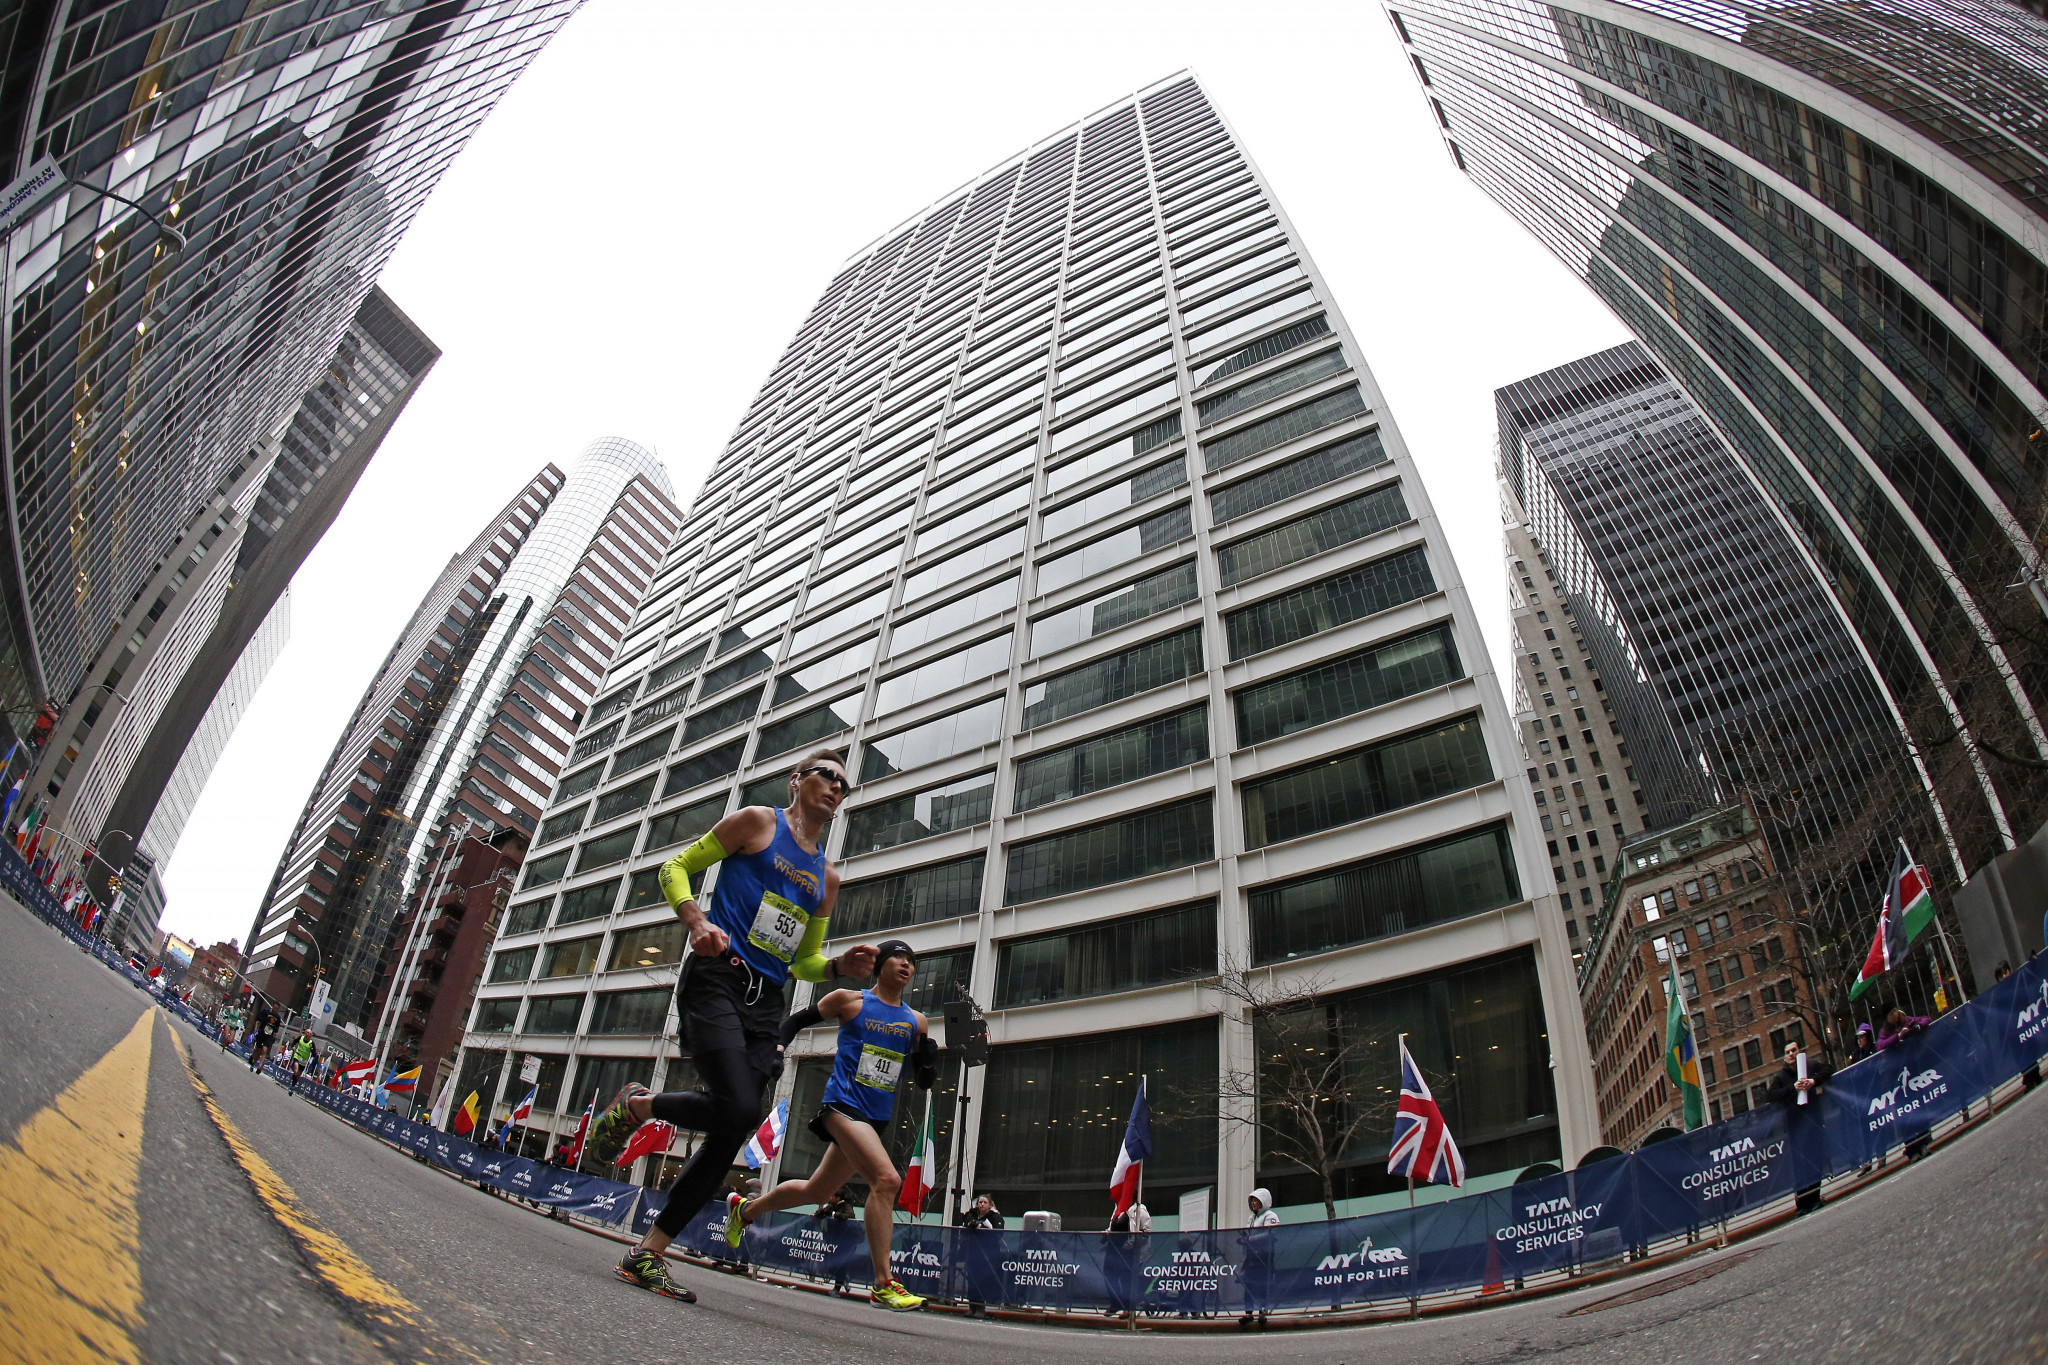 The New York Half Marathon has been cancelled due to the coronavirus outbreak ©Getty Images